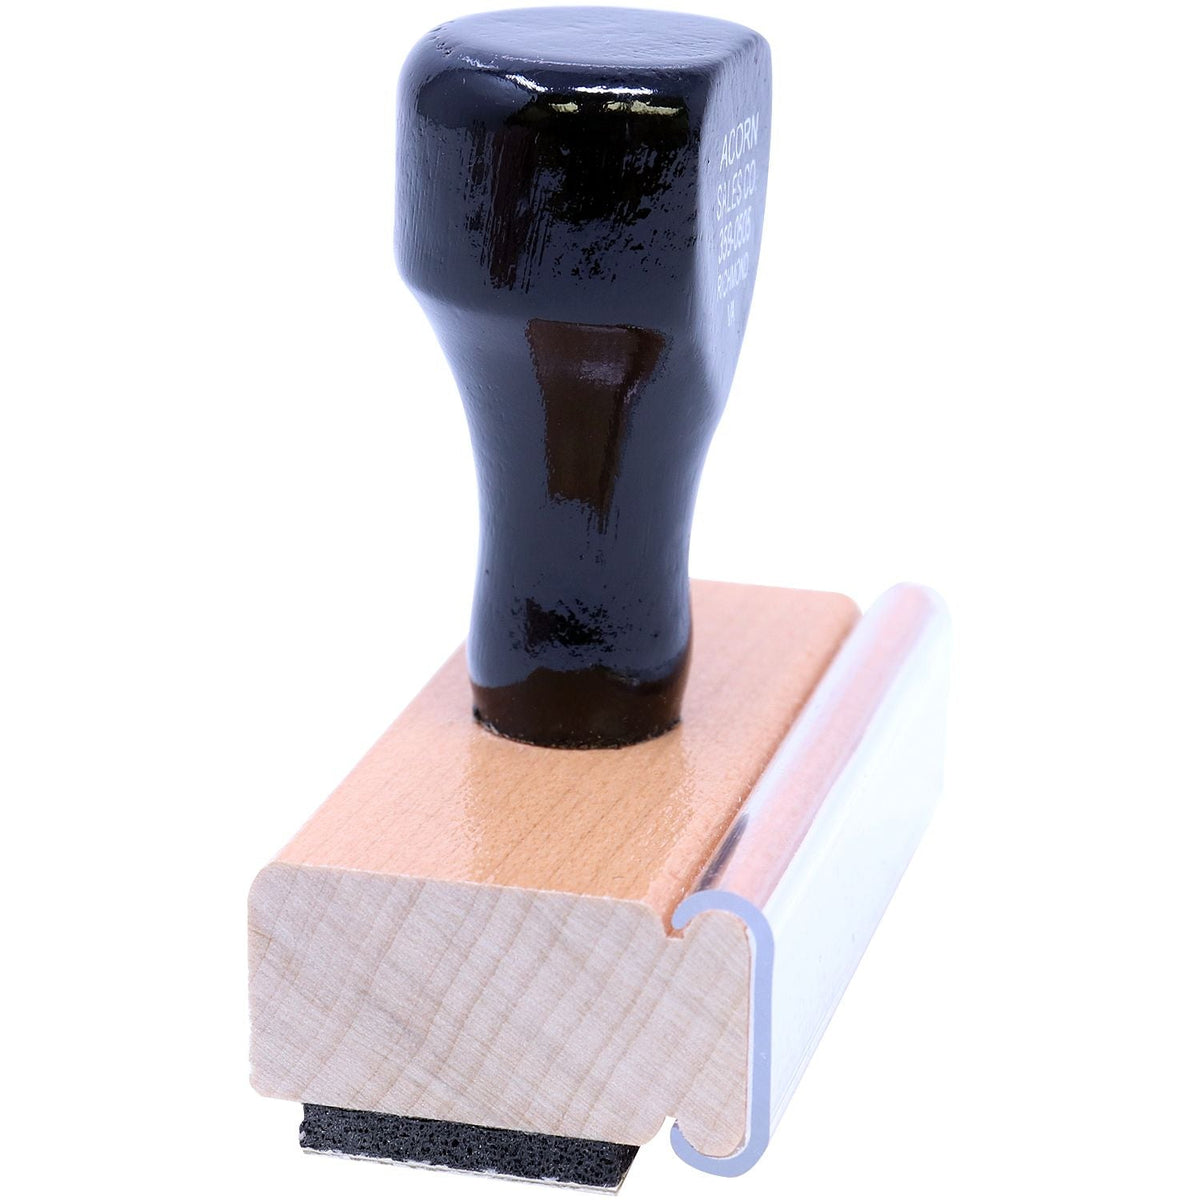 Side View of Large Contado Rubber Stamp at an Angle